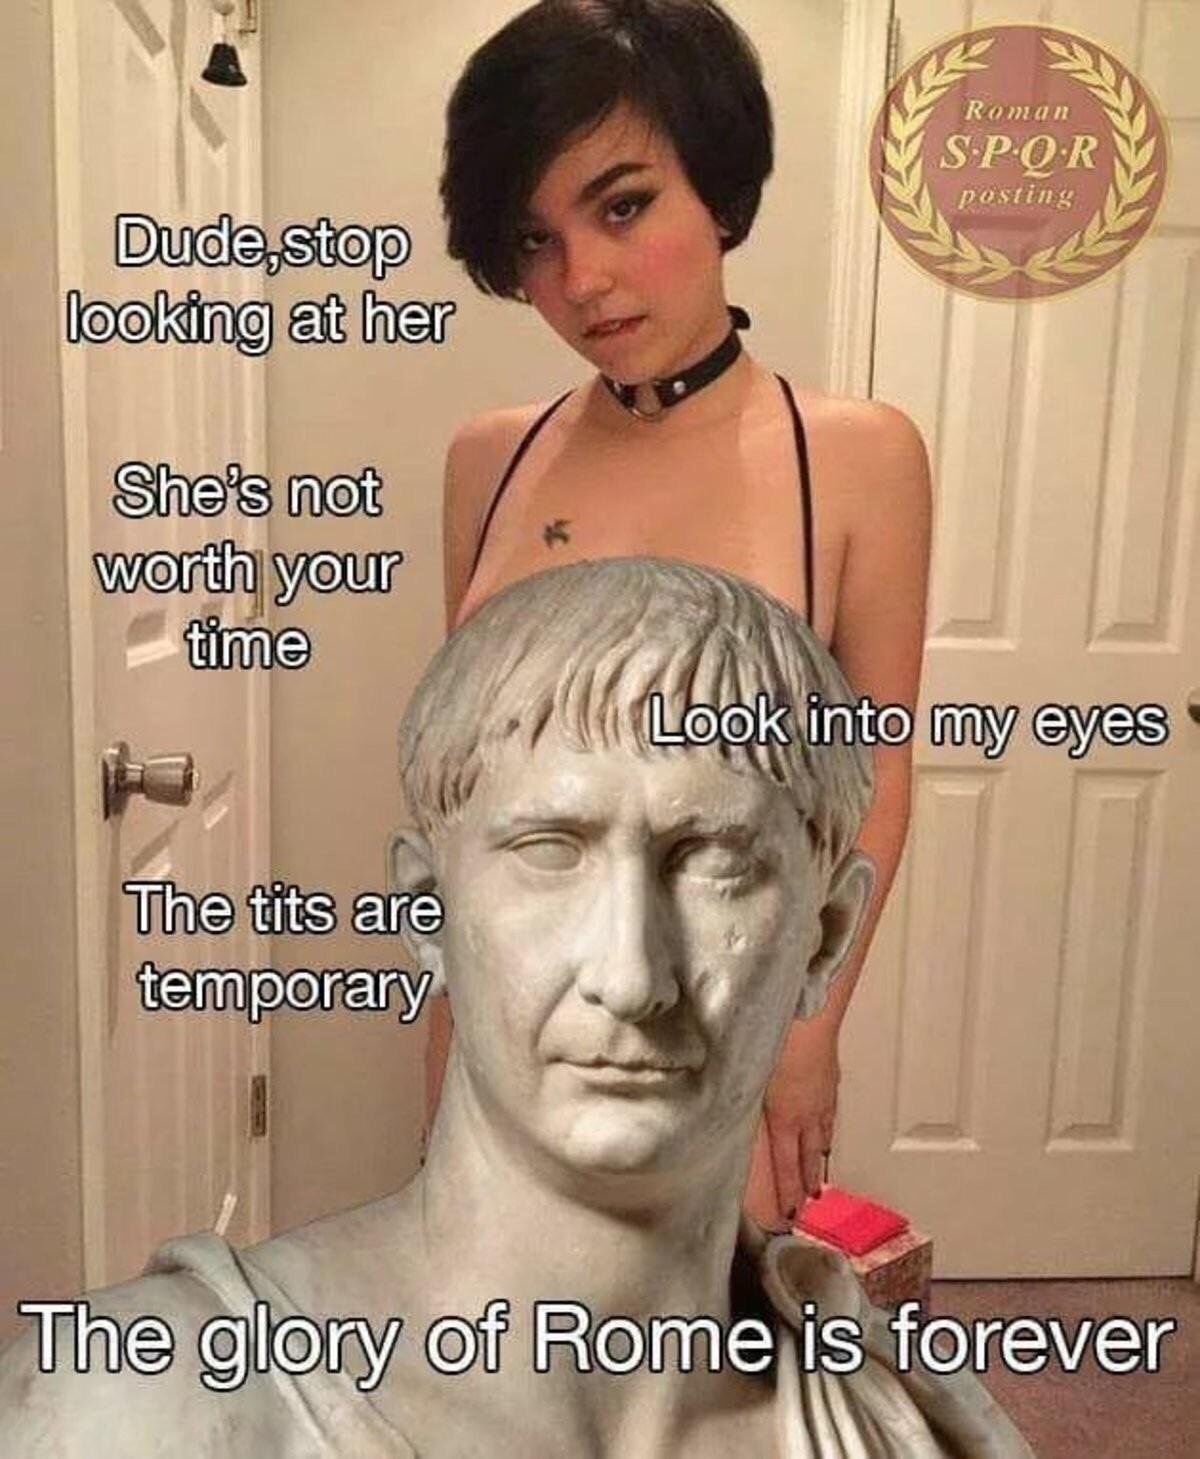 history meme - glory of rome meme - Roman Spor posting Dude,stop looking at her She's not worth your time Look into my eyes The tits are temporary The glory of Rome is forever